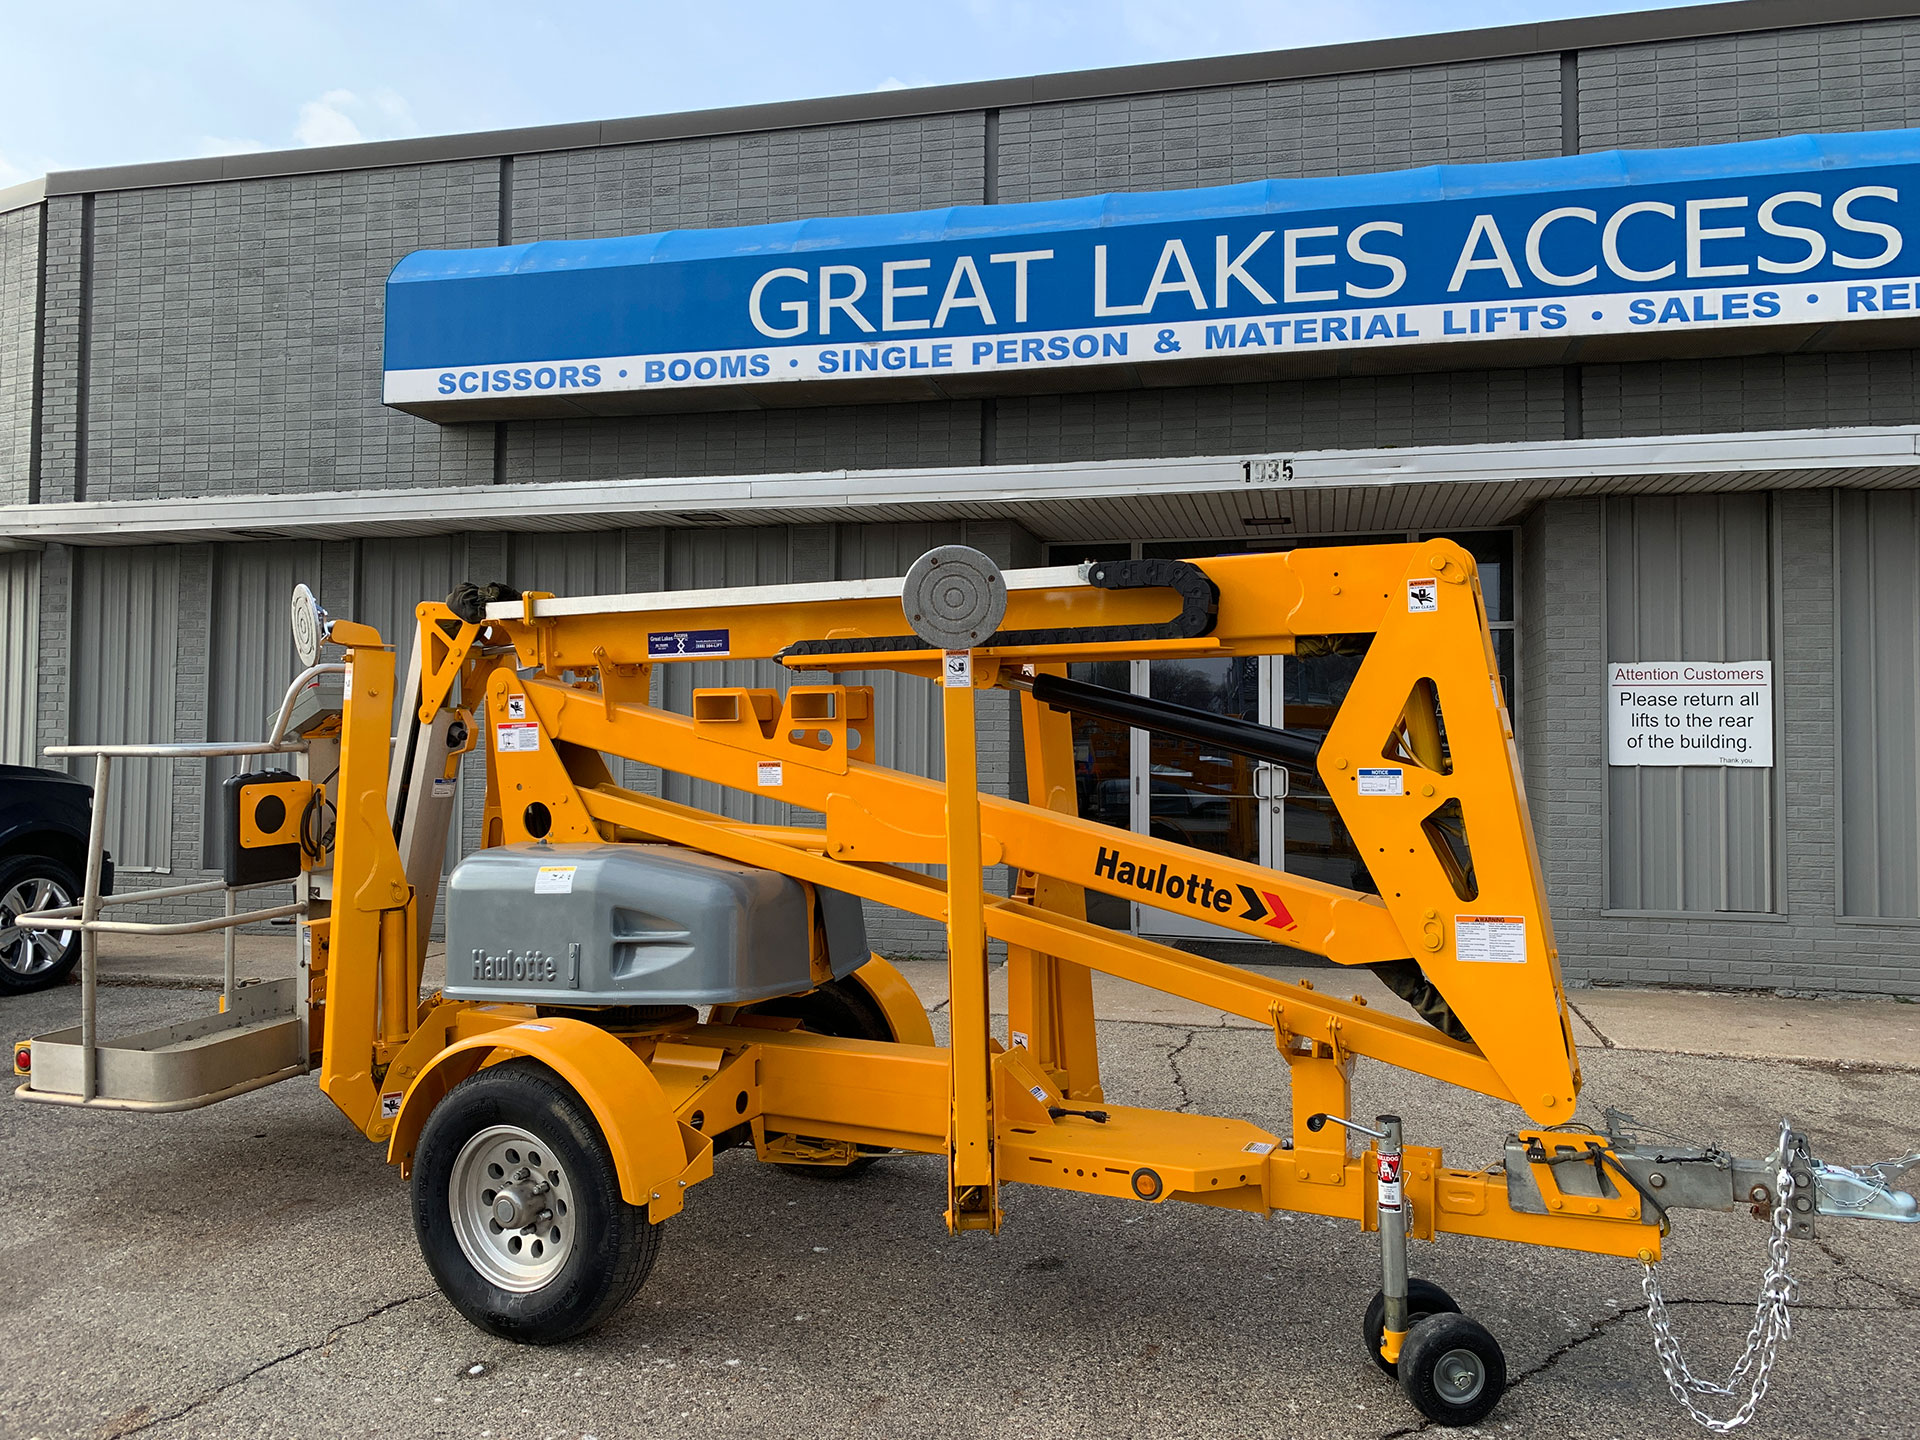 Great Lakes Access storefront behind trailer boom lift